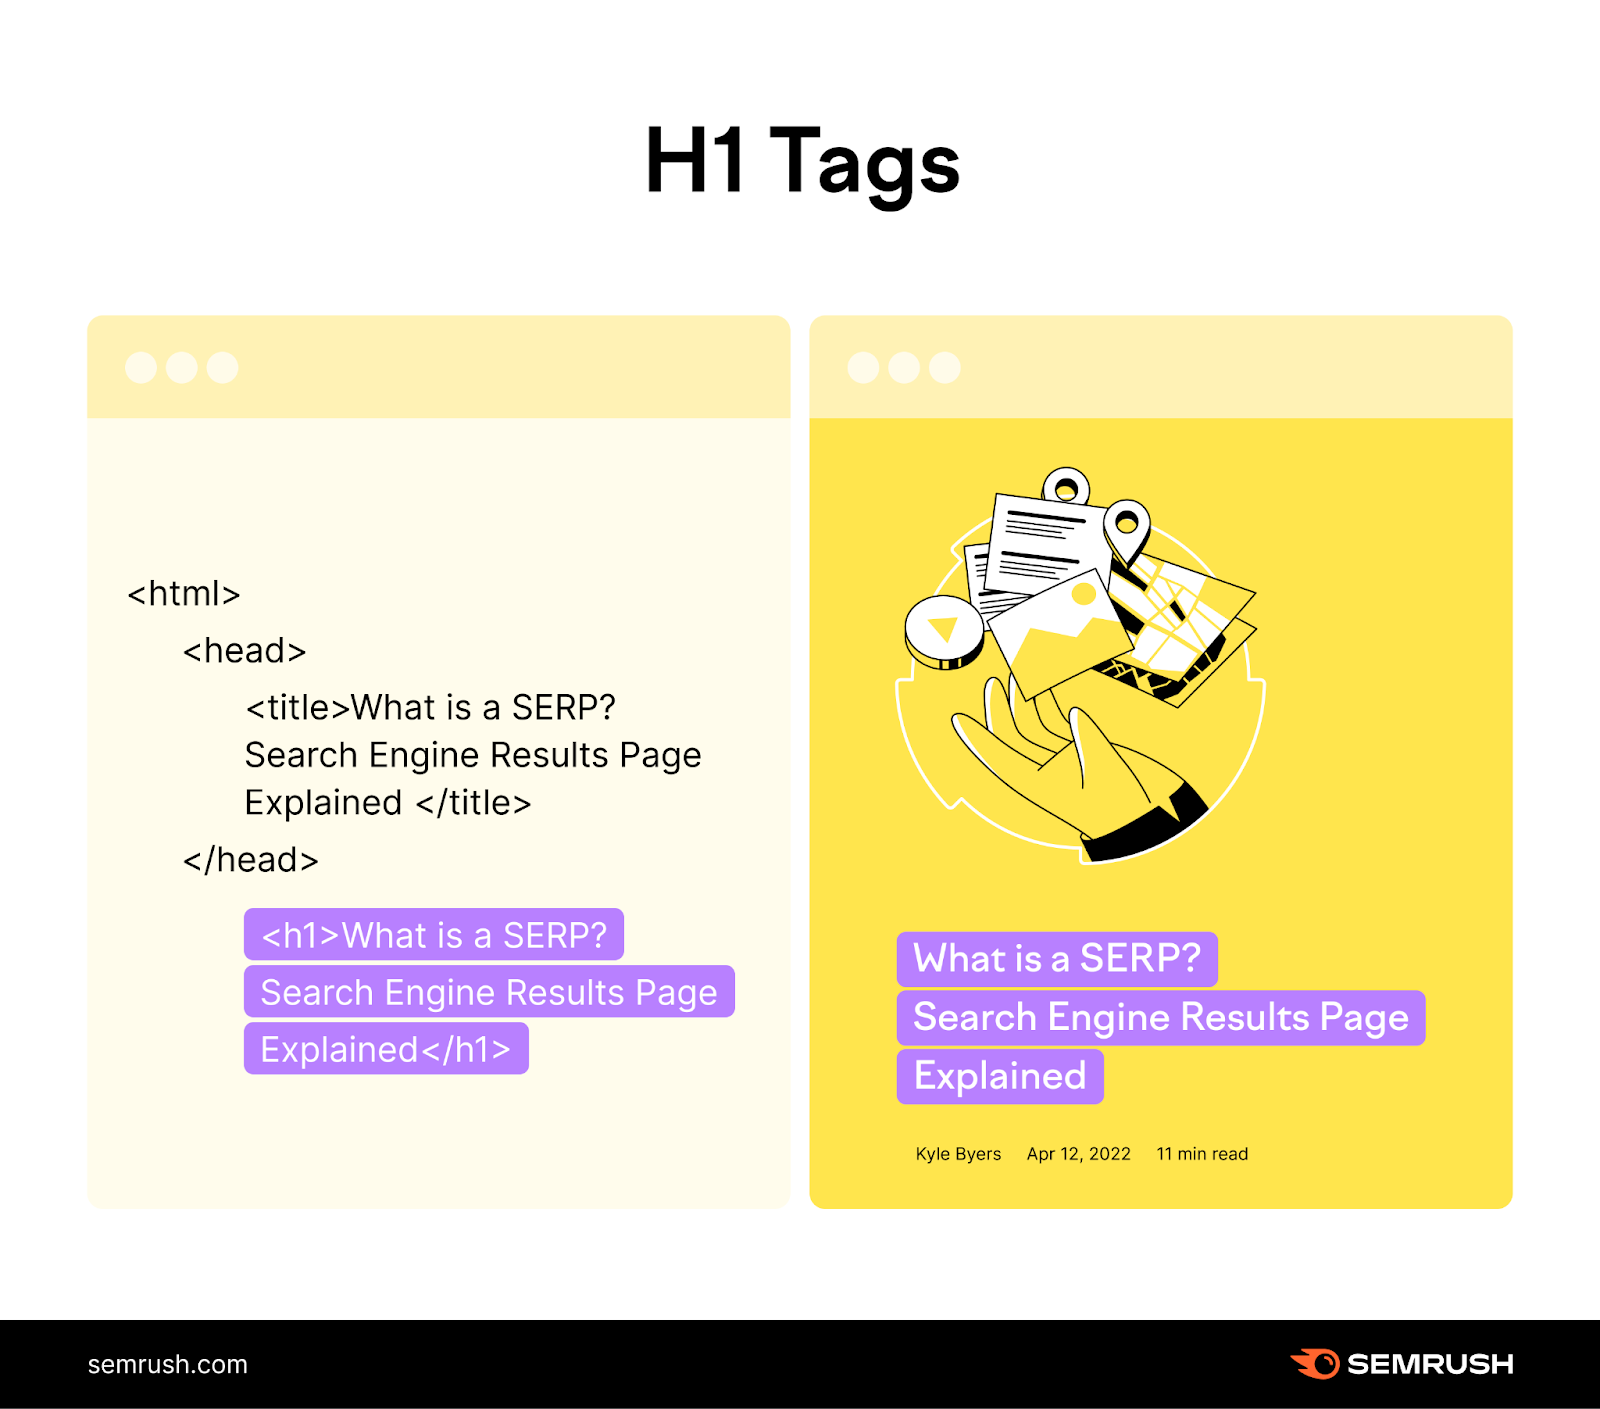 on the left is html code for the h1 tag and on the right is how the h1 tag appears on the webpage as seen by a user